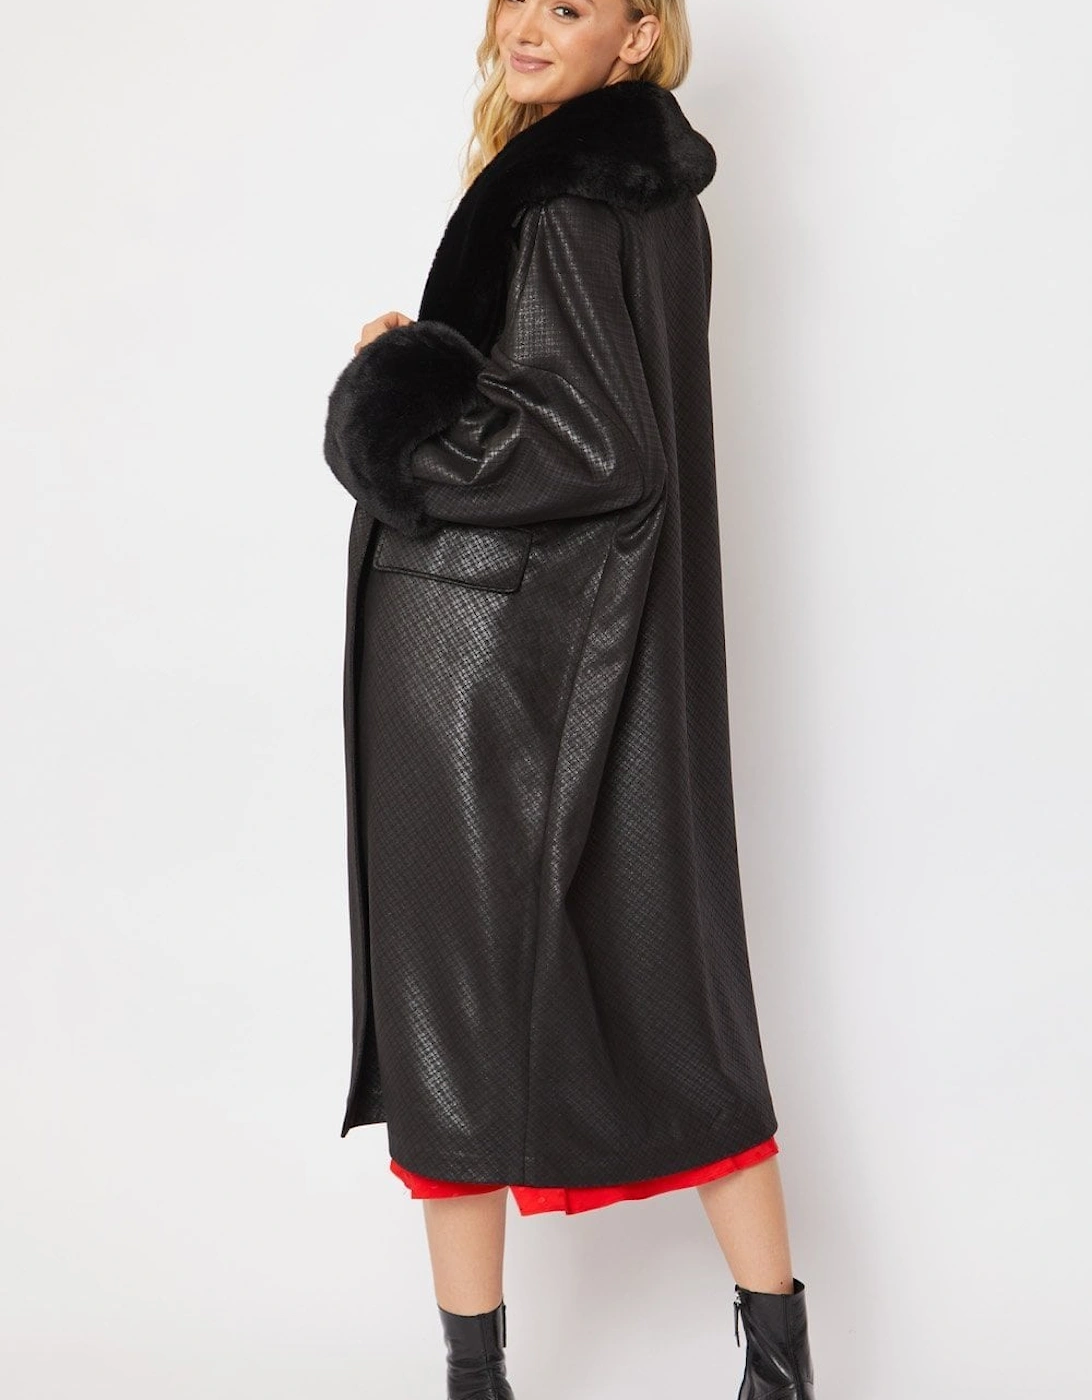 Black Oversized Faux Suede Jacket With Detachable Faux Fur Cuffs & Collar